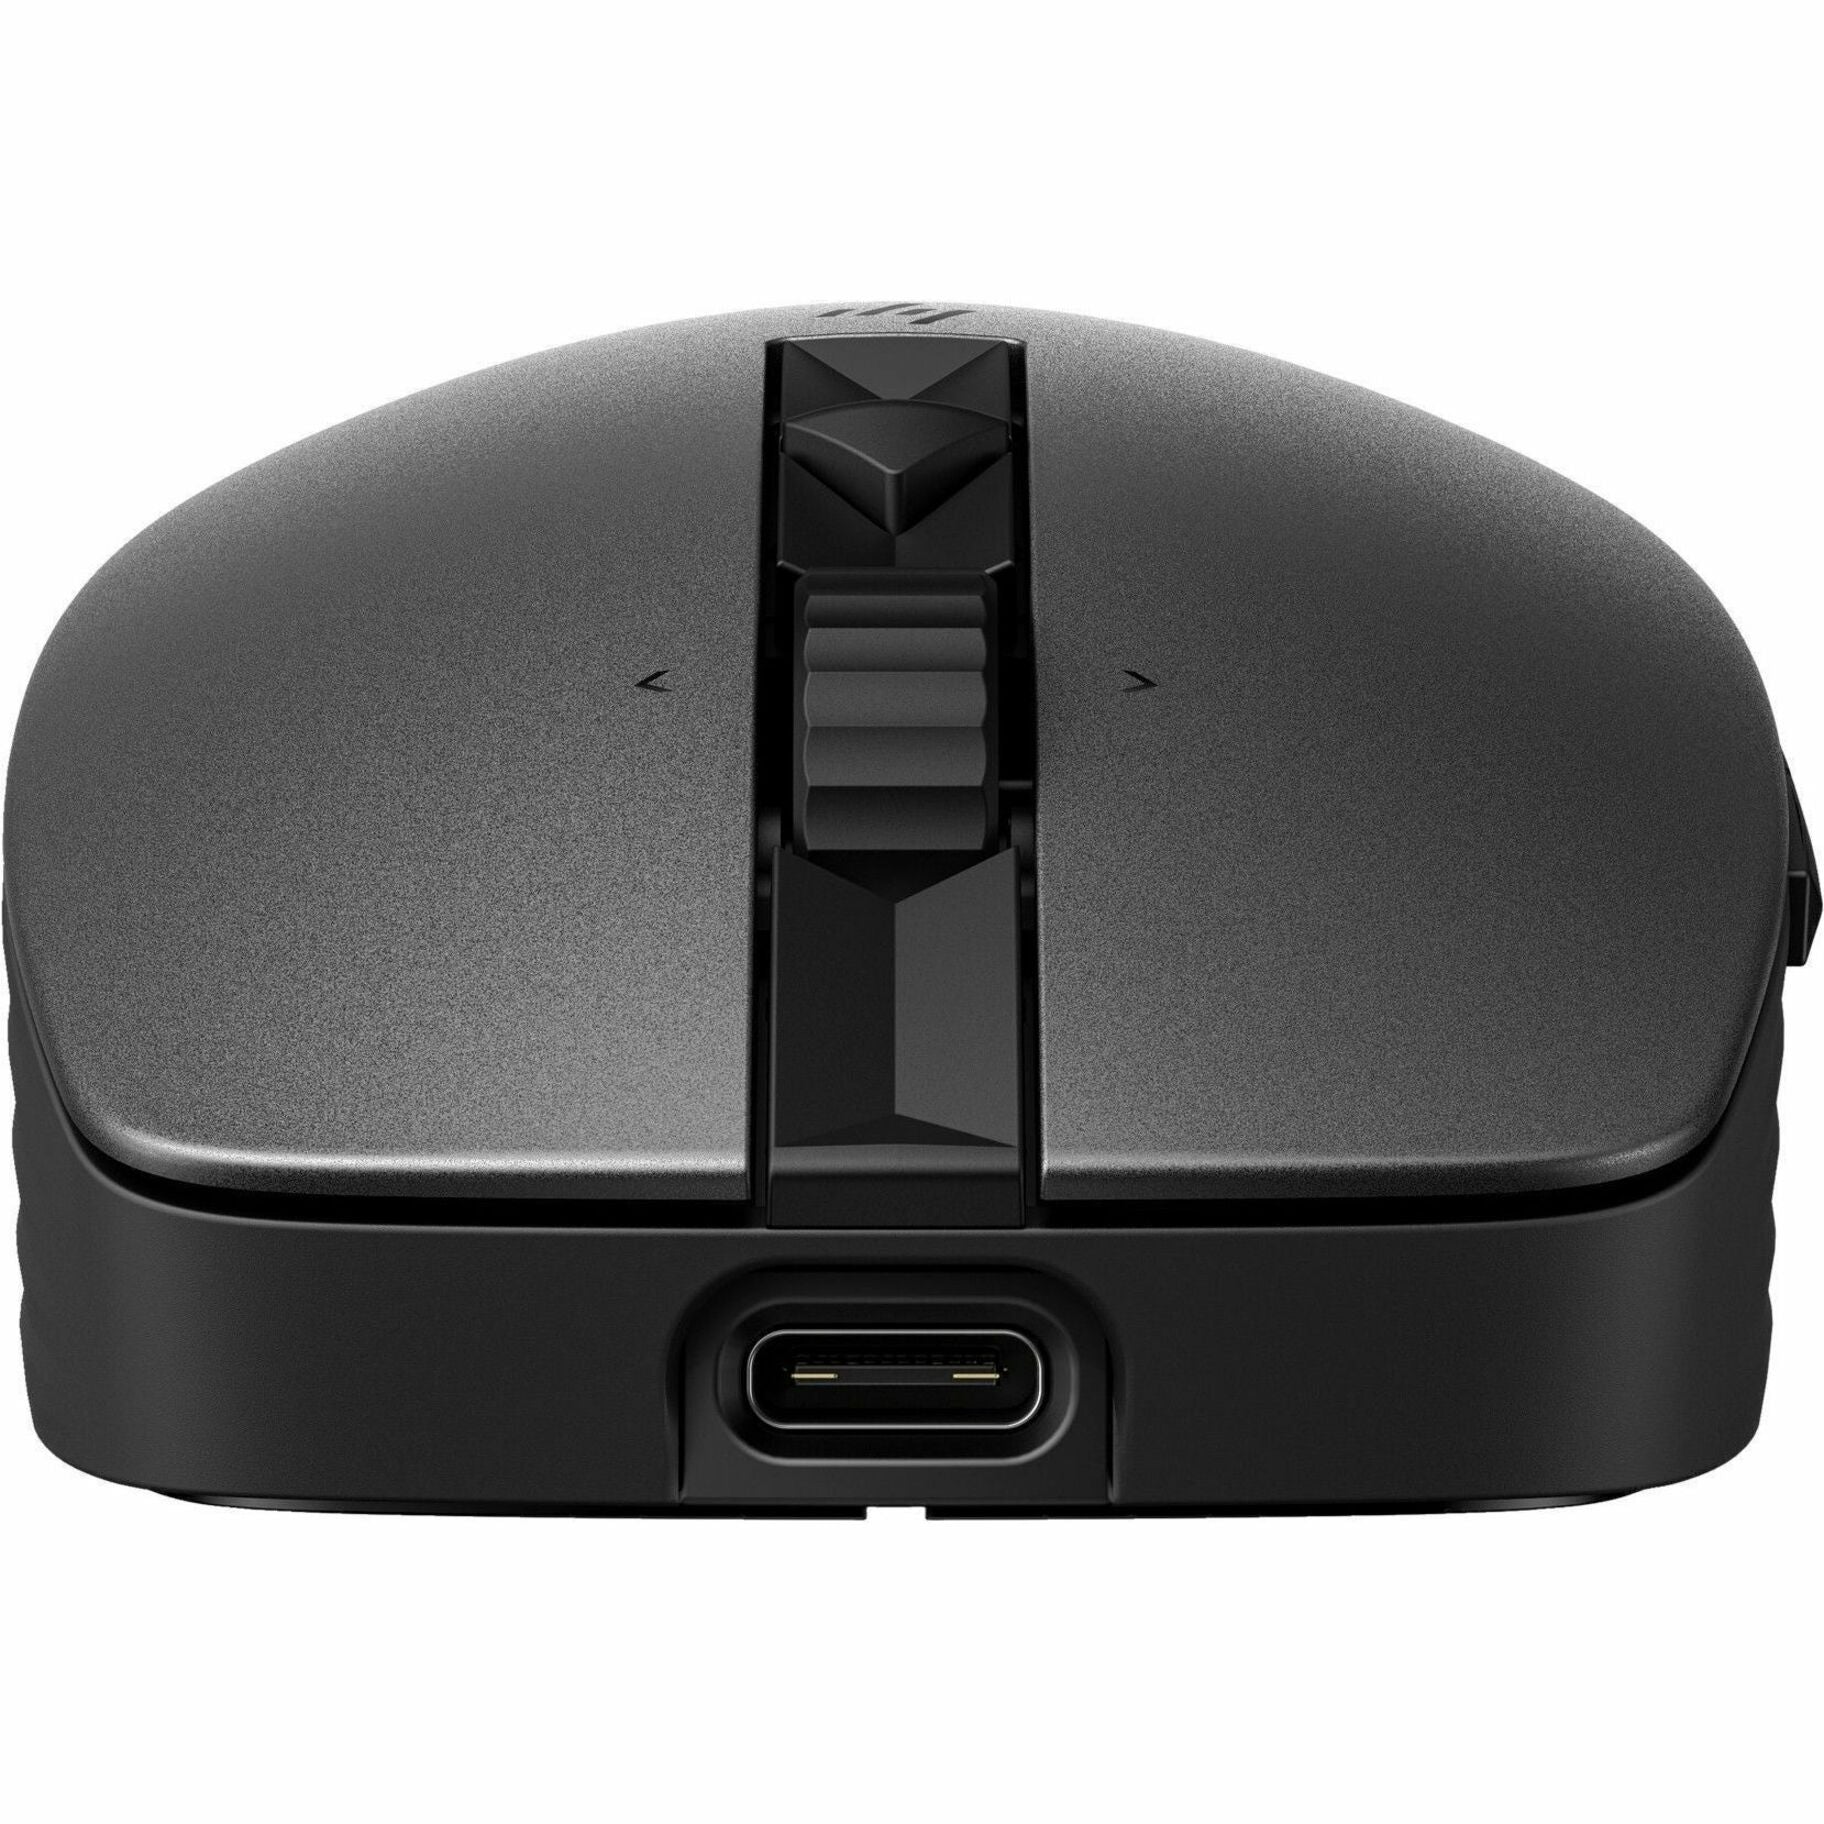 HP 6E6F2AA#ABL 710 Rechargeable Silent Mouse, Ergonomic Fit, Tilt Wheel, Track-On-Glass, 3000 dpi